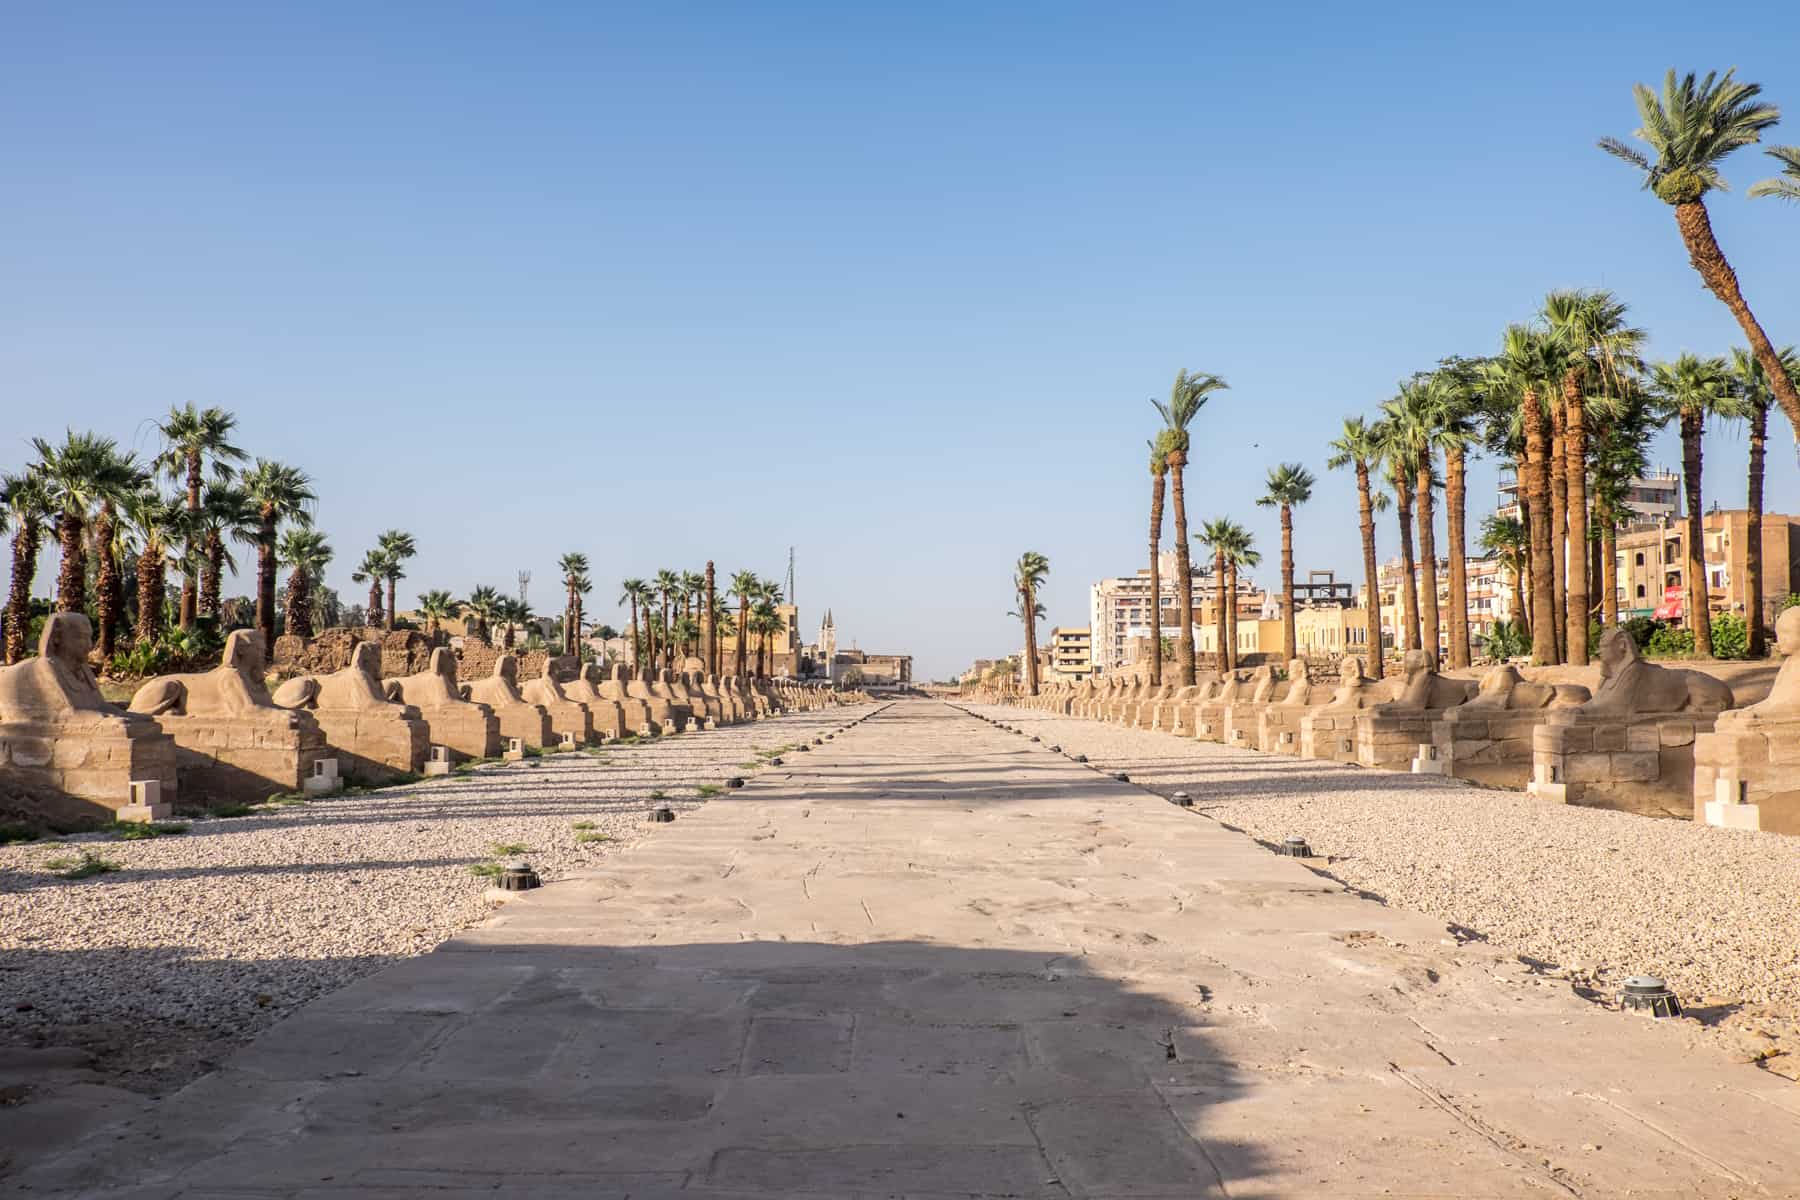 The wide avenue known as Sphinx Alley because of all the small Sphinx statues that line either side of it, connect the Luxor and Karnak temples in Egypt